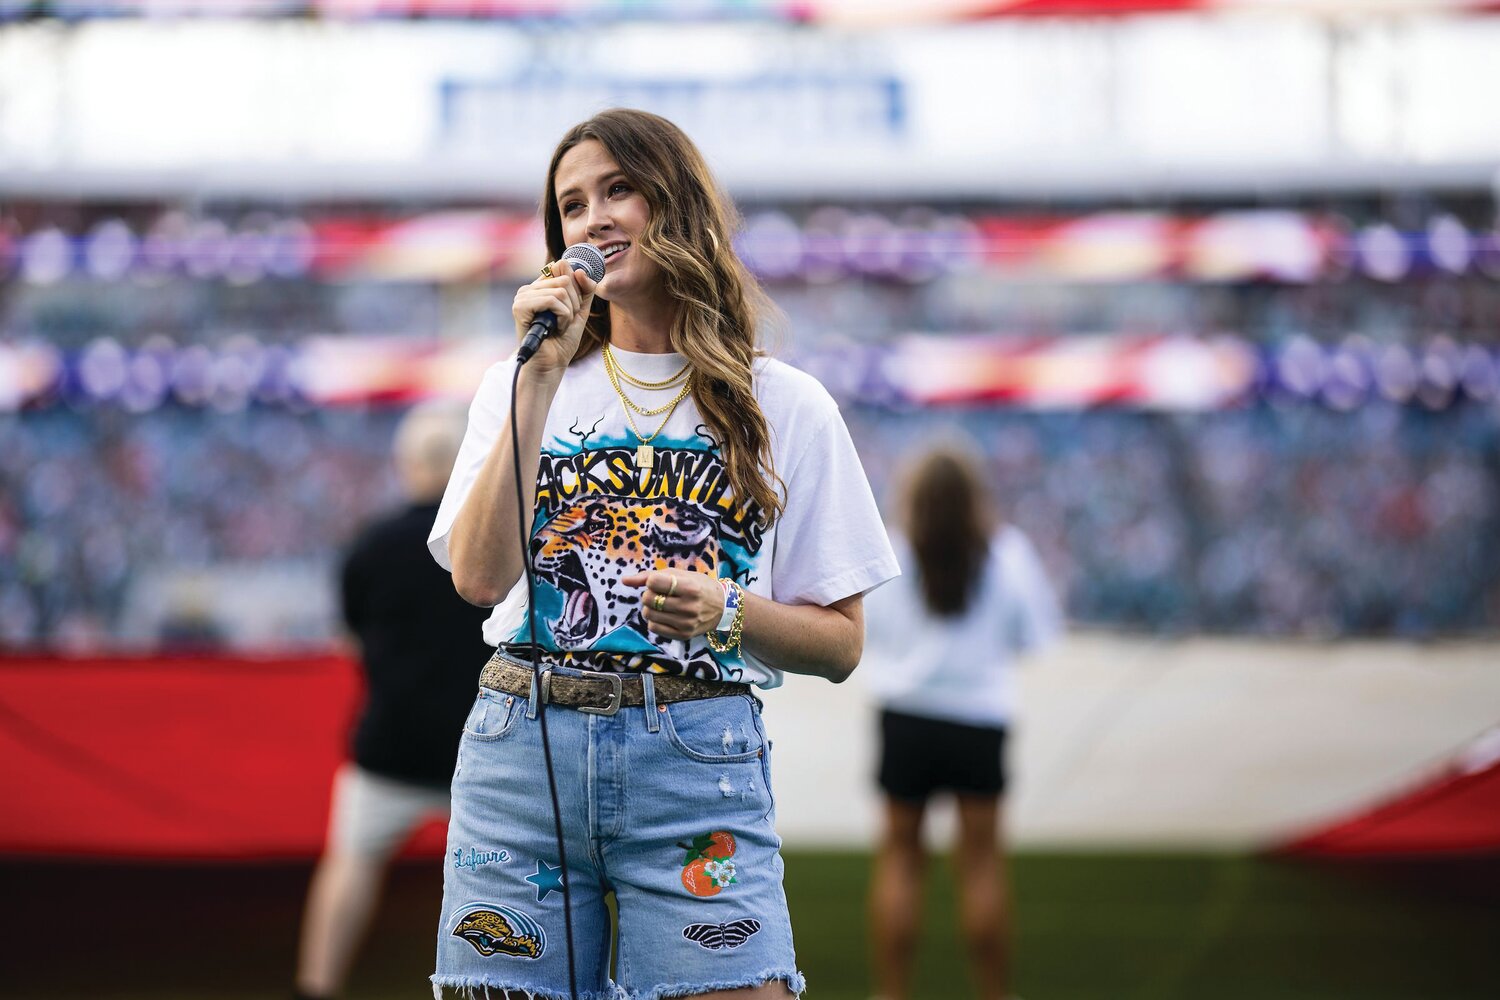 Singing the National Anthem was the next step in her musical journey after being a contestant in season 22 of NBC’s “The Voice,” in 2022.